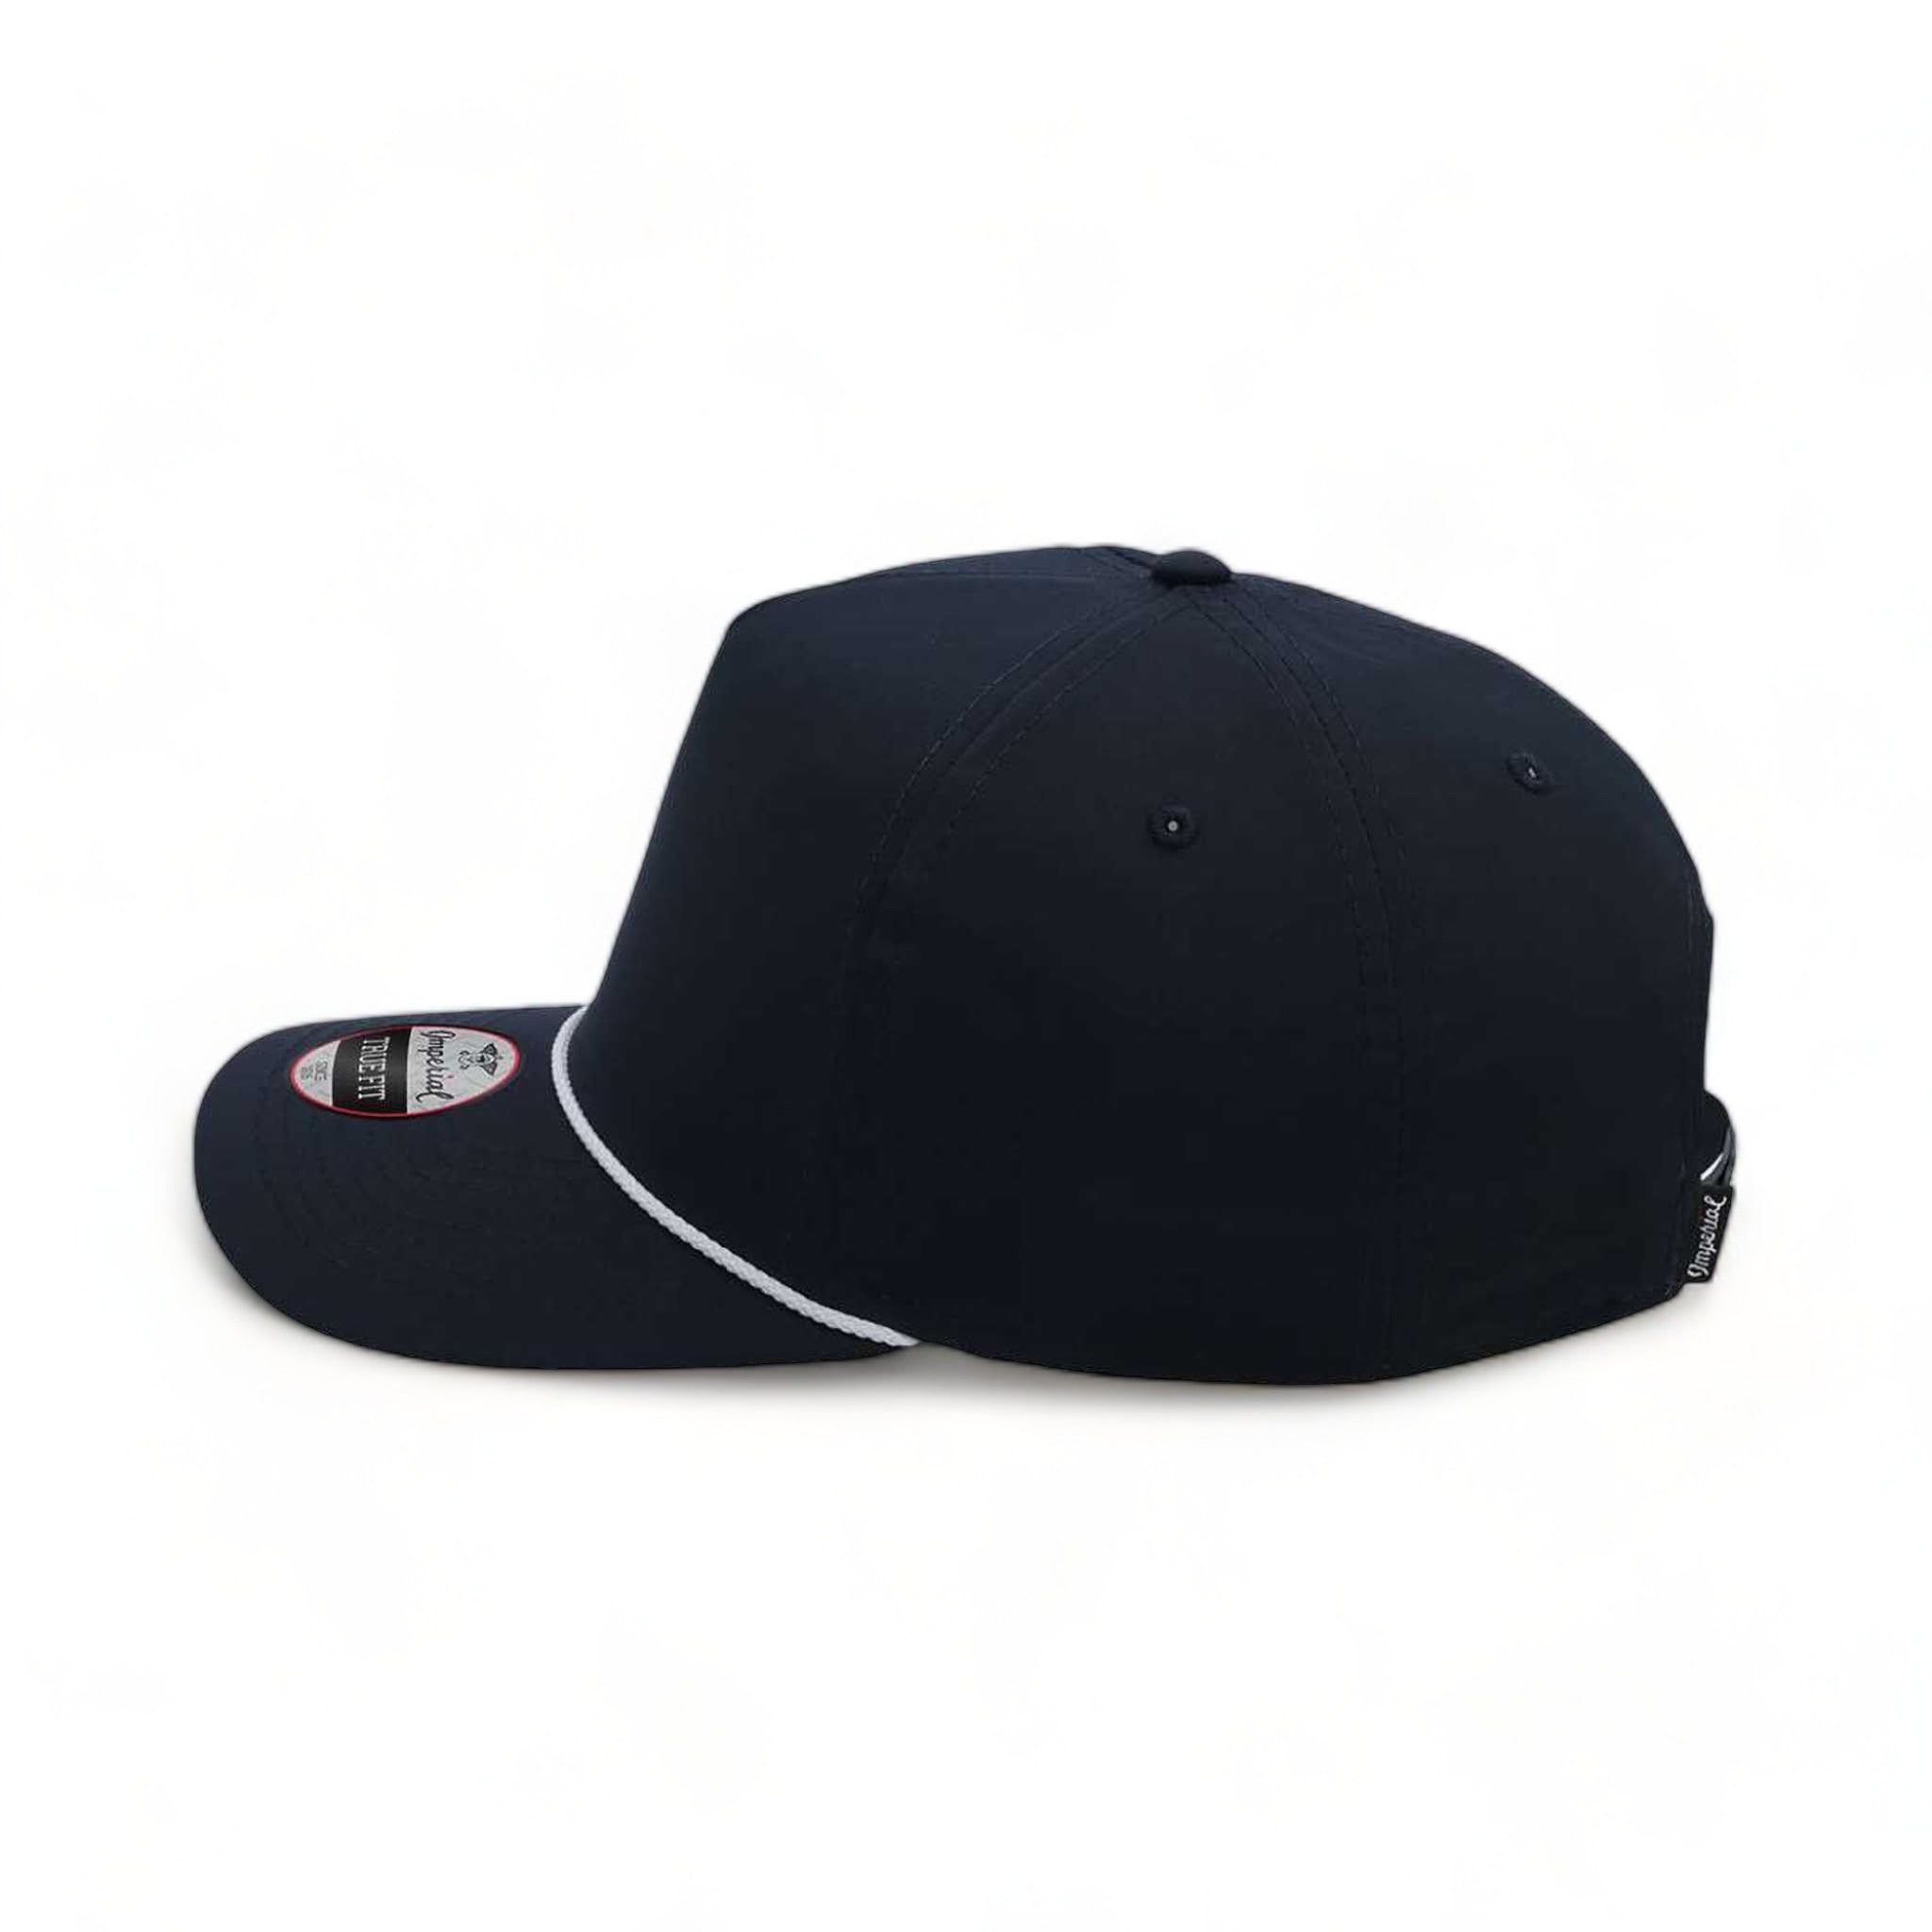 Side view of Imperial 5054 custom hat in navy and white